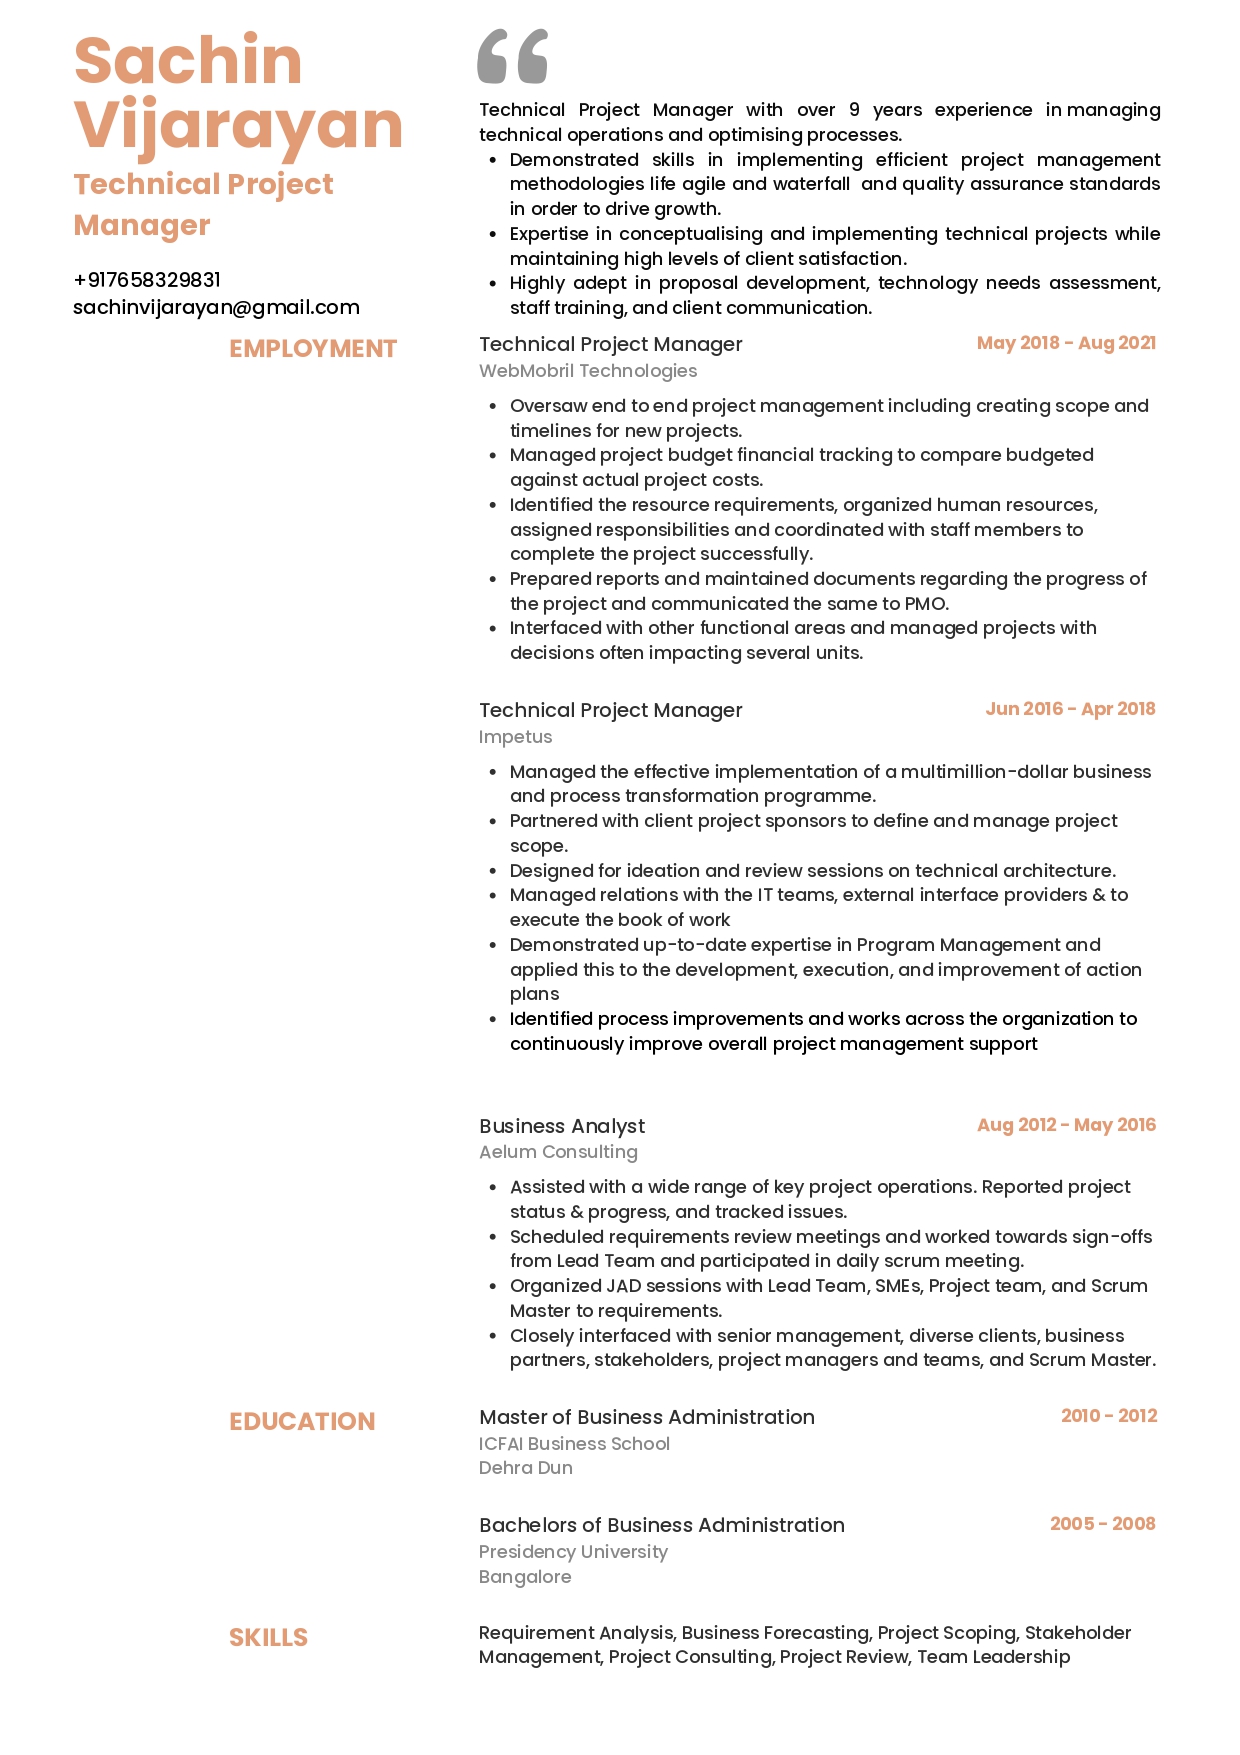 Resume of Technical Project Manager